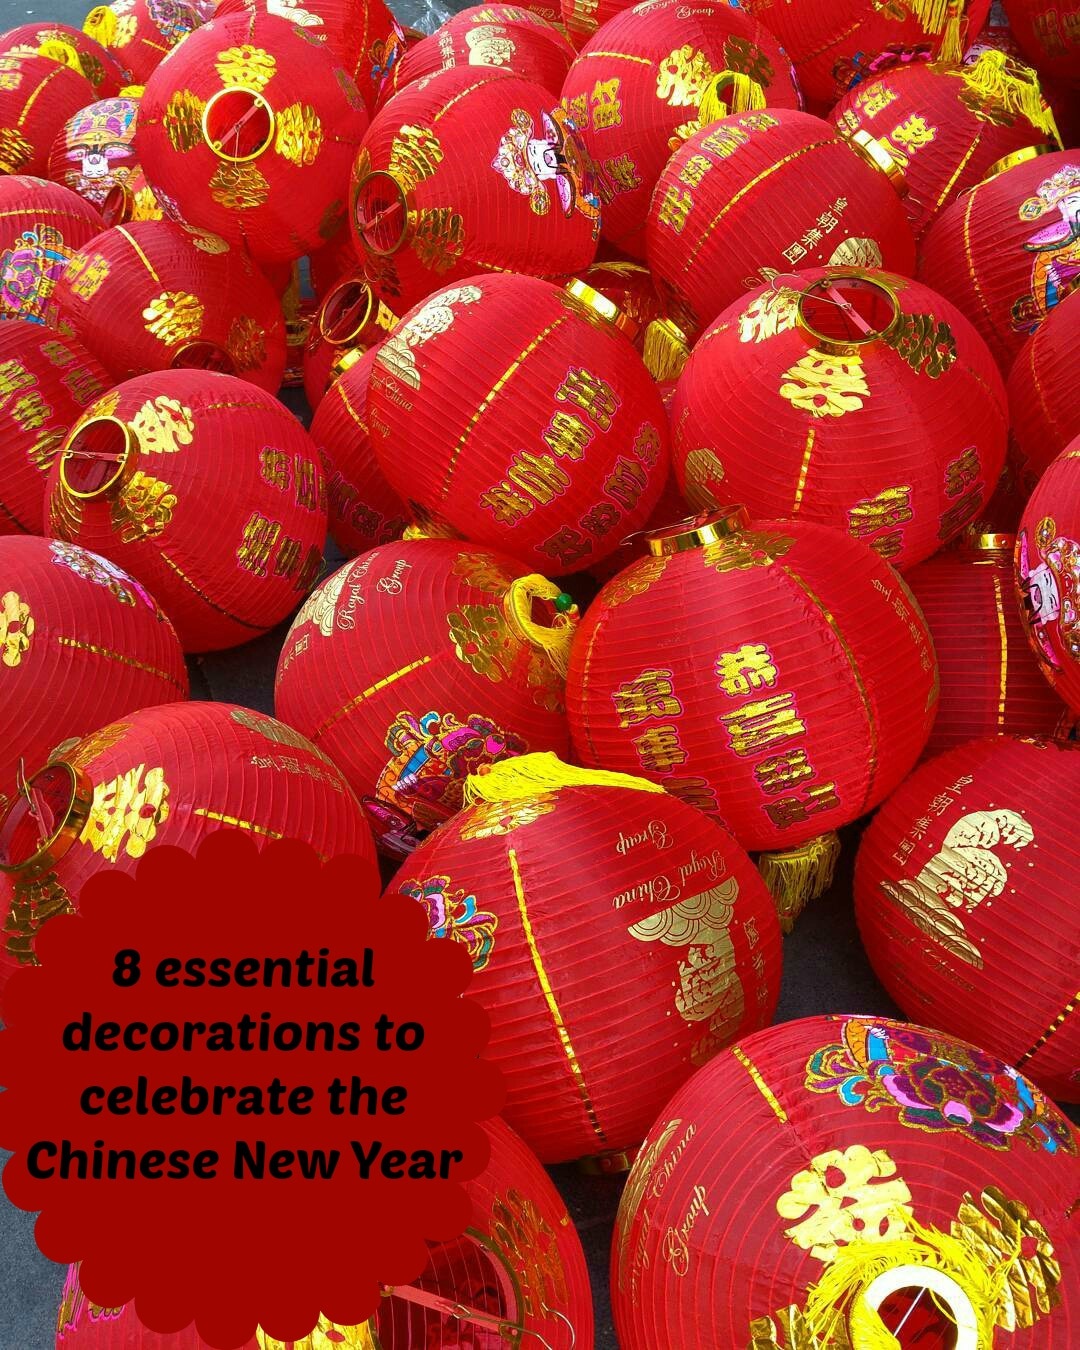 _essentia_decorations_to_celebrate_the_Chinese_New_Year